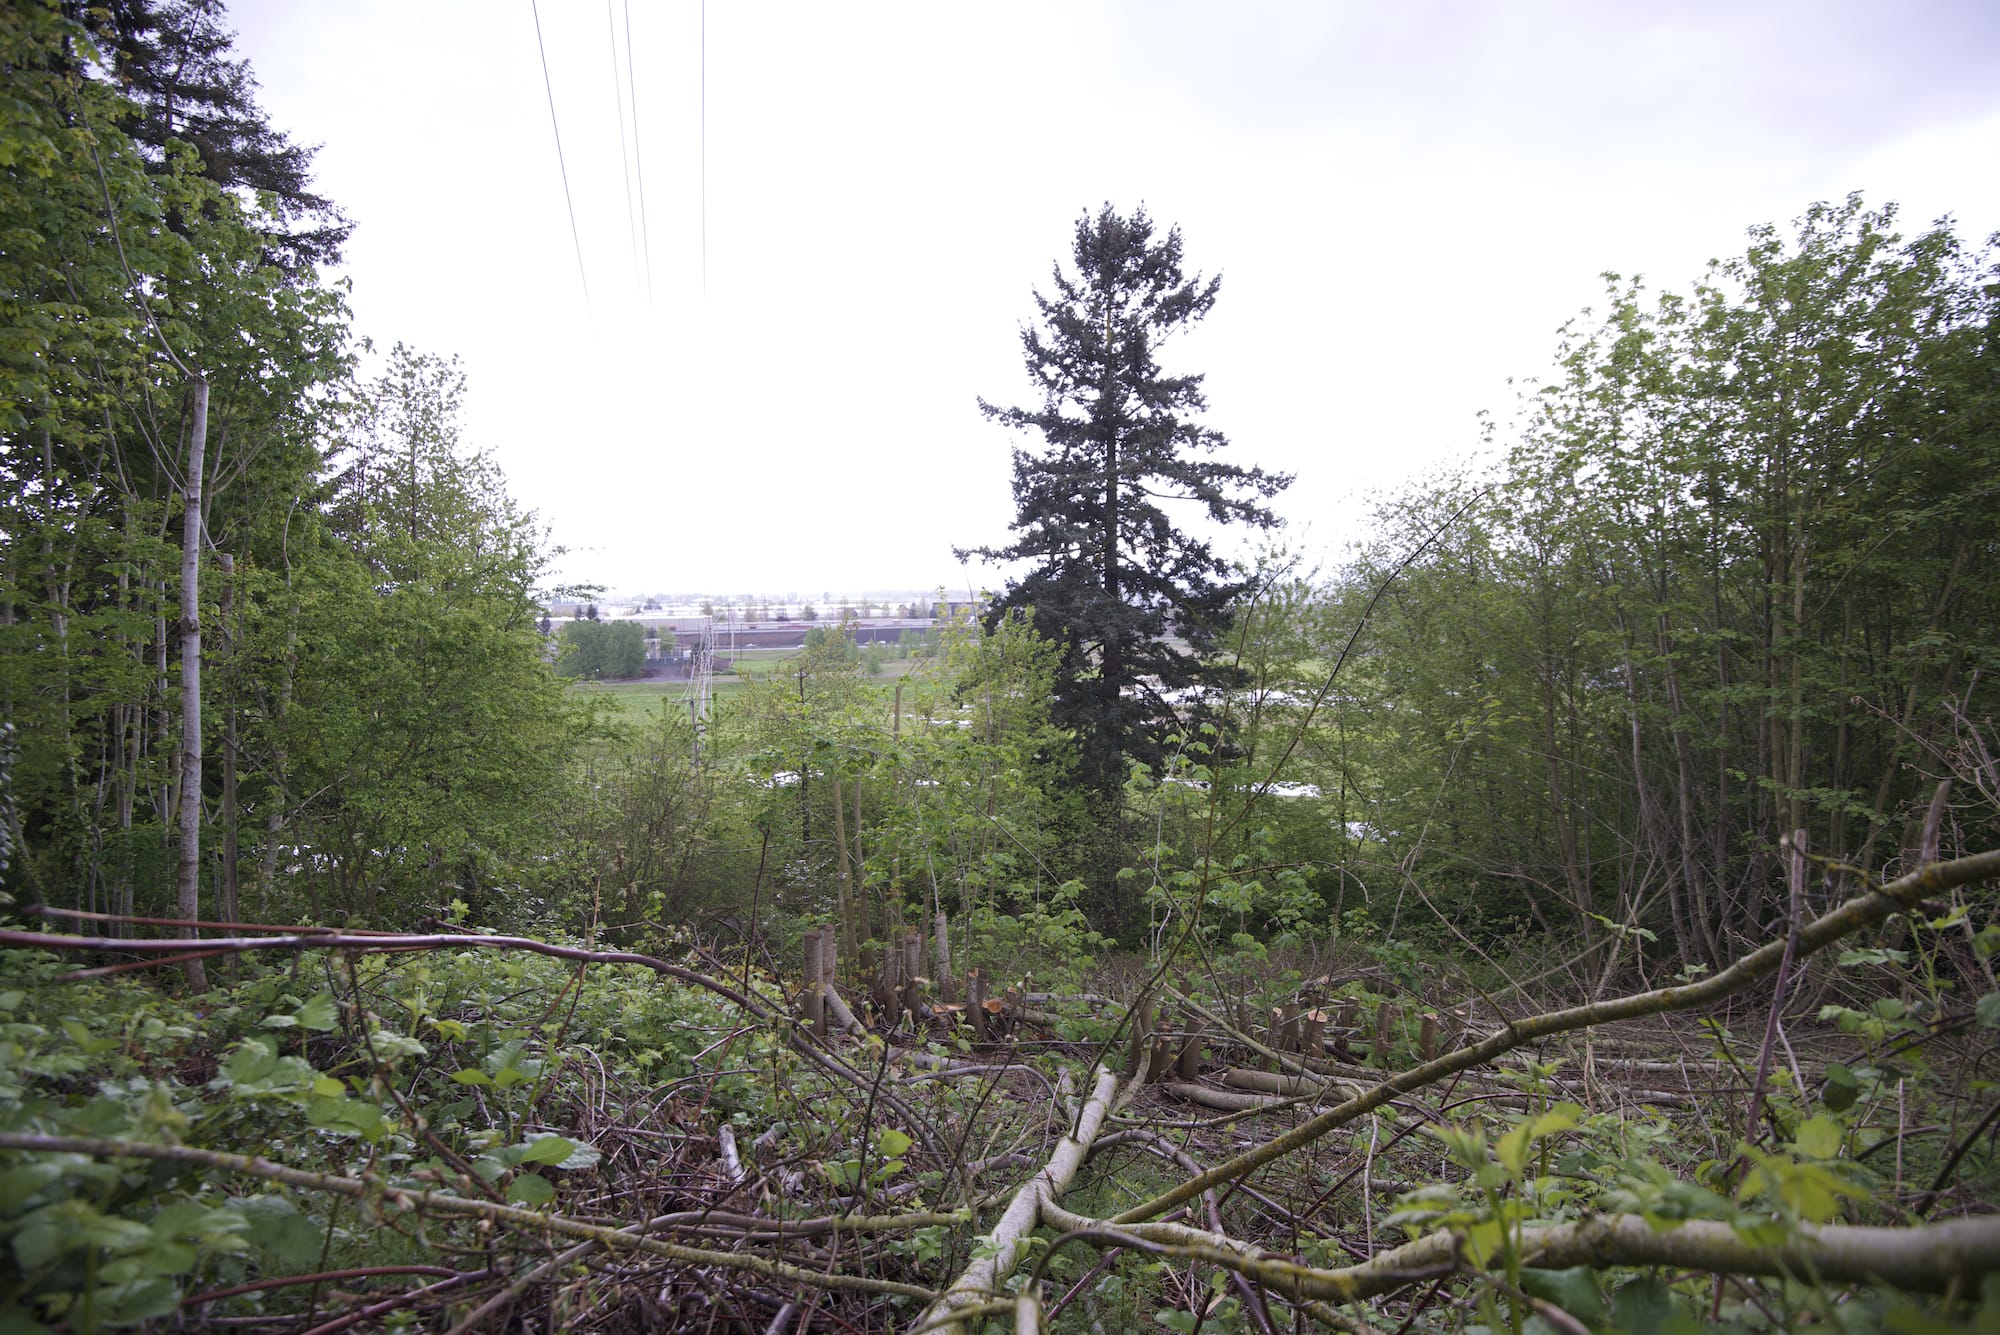 An official with the city of Vancouver said the man illegally removed several trees near his home to enhance the view.